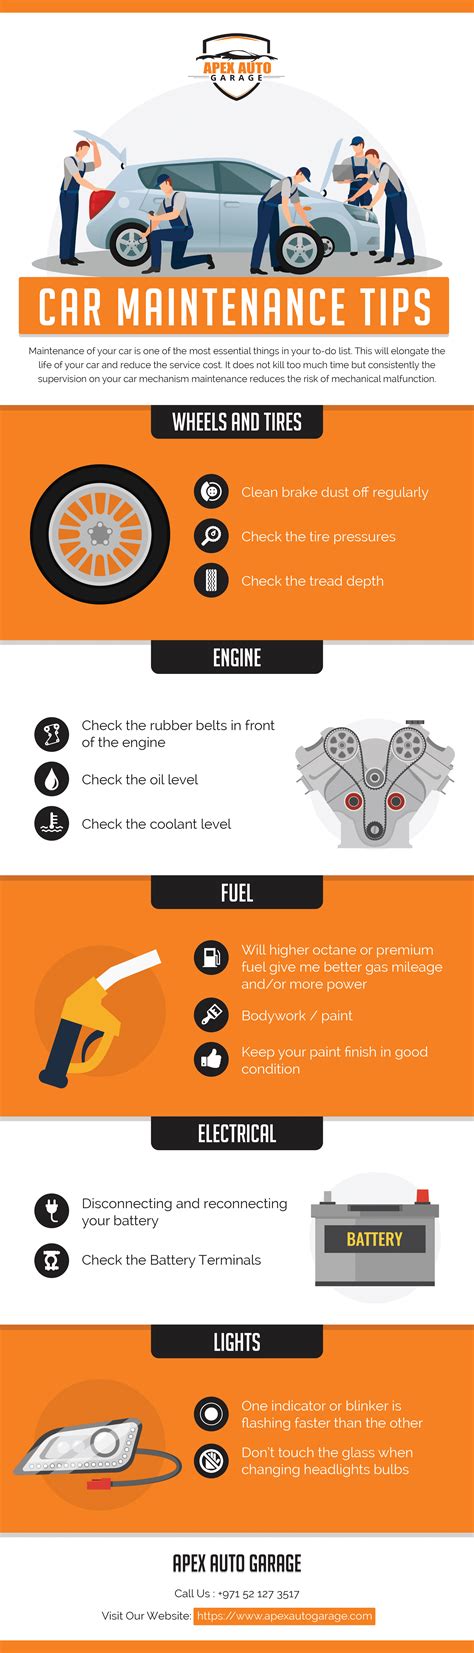 Car maintenance tips. To properly winterize a car, you should change your fuel filter, which clogs up after a year or two and can no longer work as efficiently as before. 6. Don’t forget to wash your car. Mud deposits can also damage various car components. For example, doors, door sills, headlights, the exhaust system, and even the wheels. 